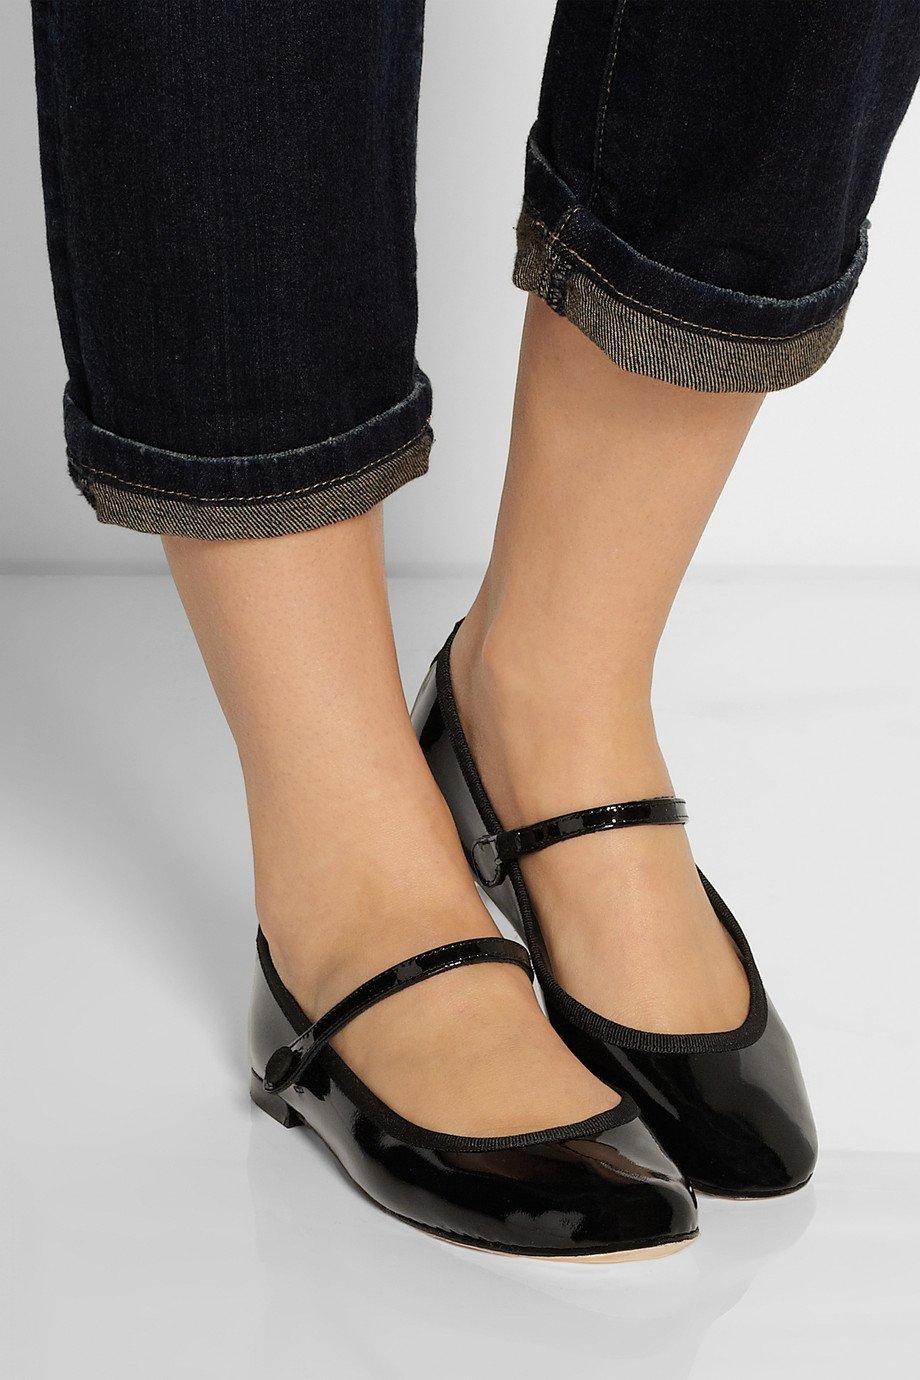 Lyst - Repetto Lio Patent-Leather Mary Jane Ballet Flats in Black